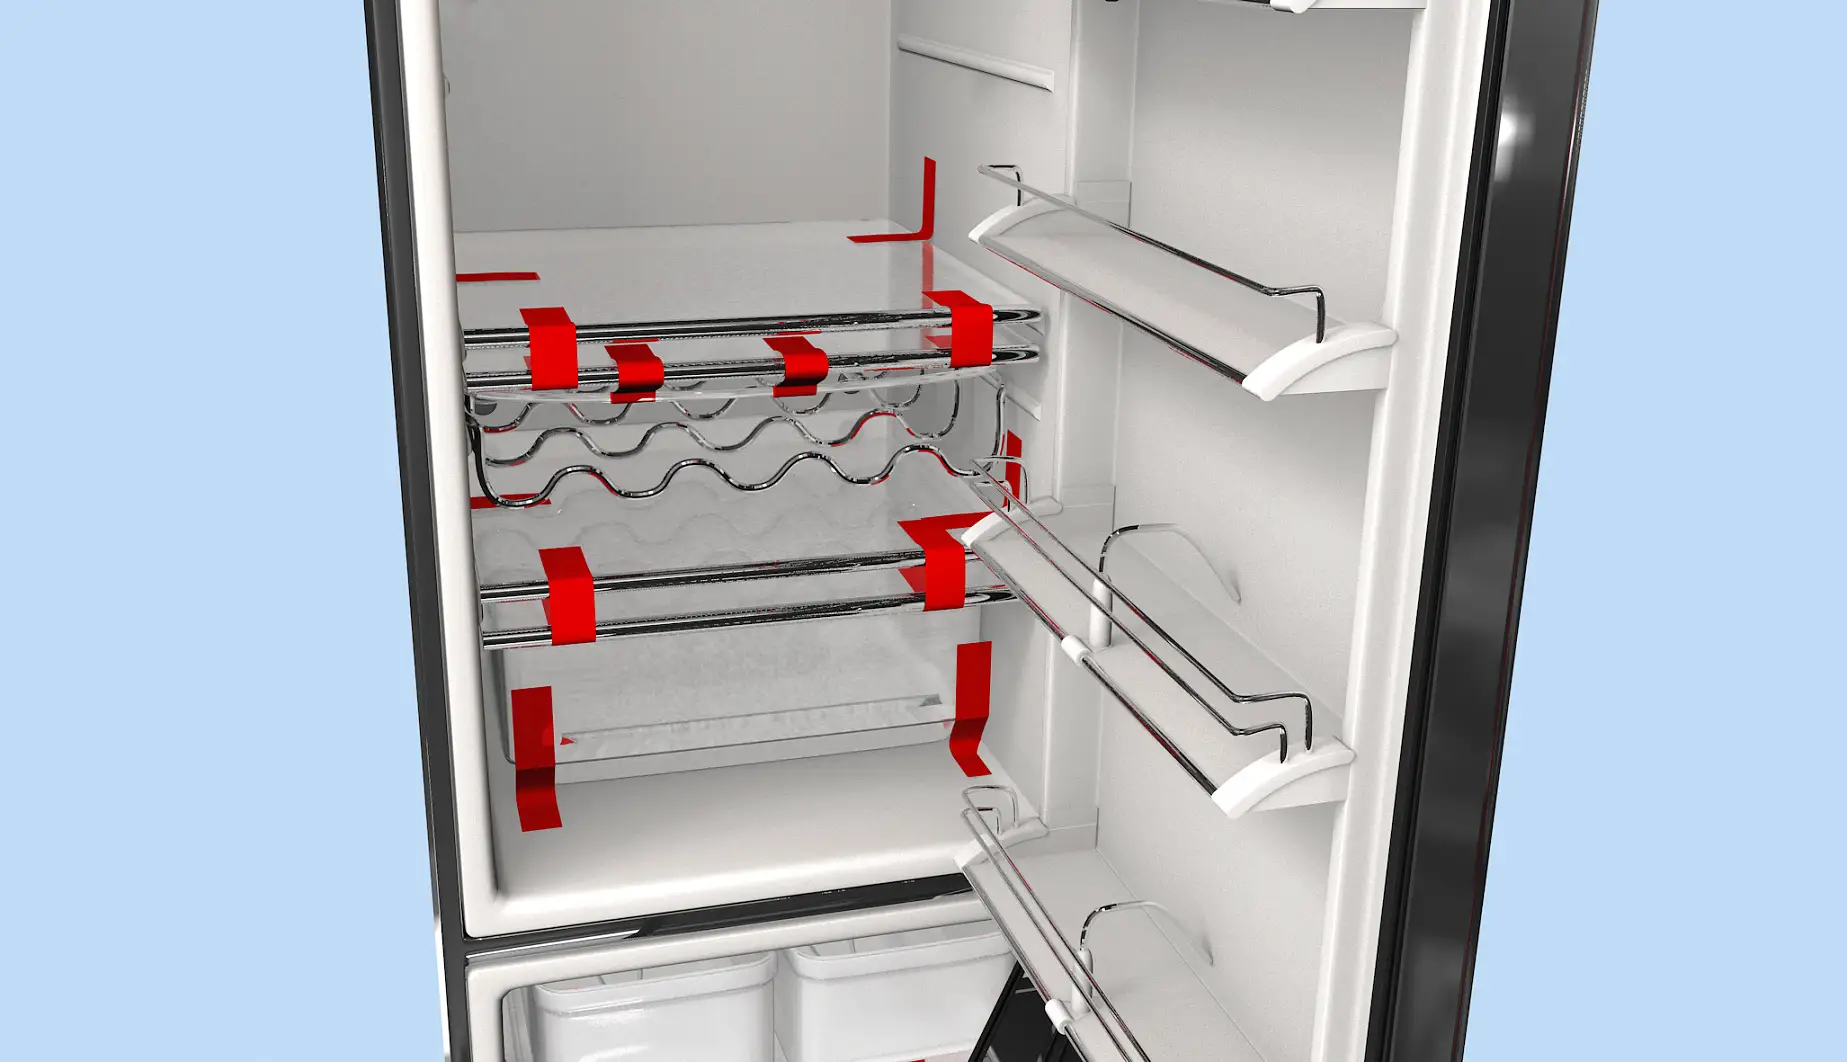 During transport, glass shelves and loose bins are fixed with strapping tape.